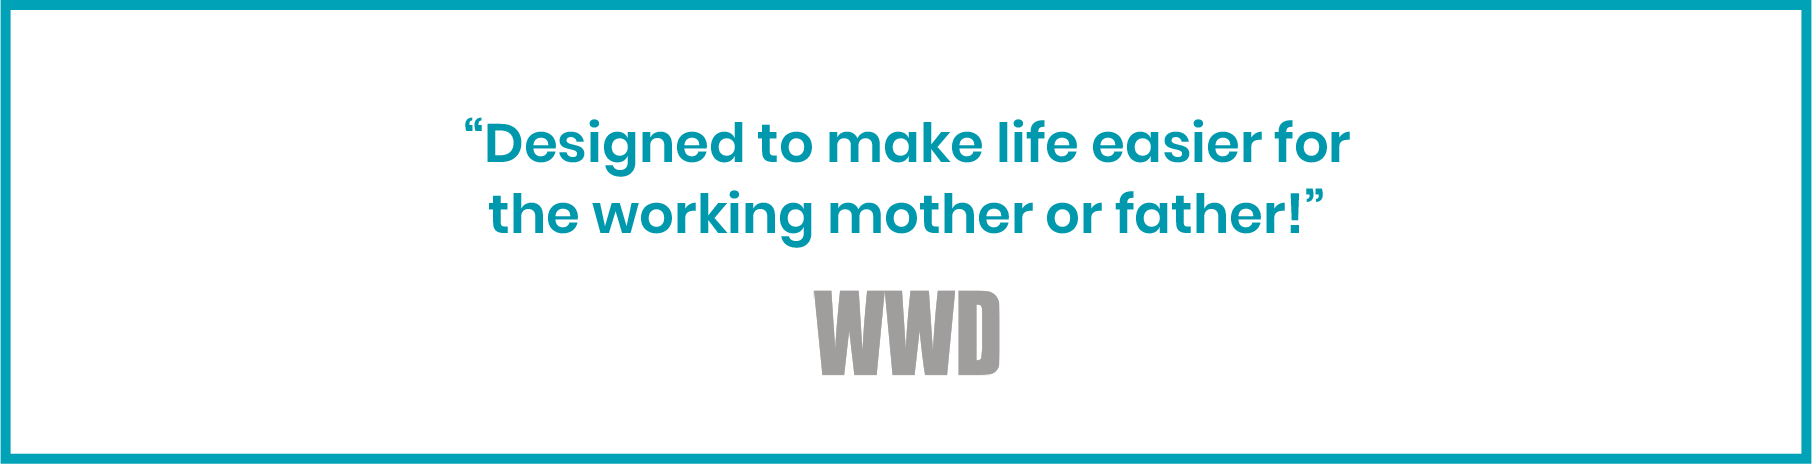 Designed to make life easier for the working mother or father! - WWD